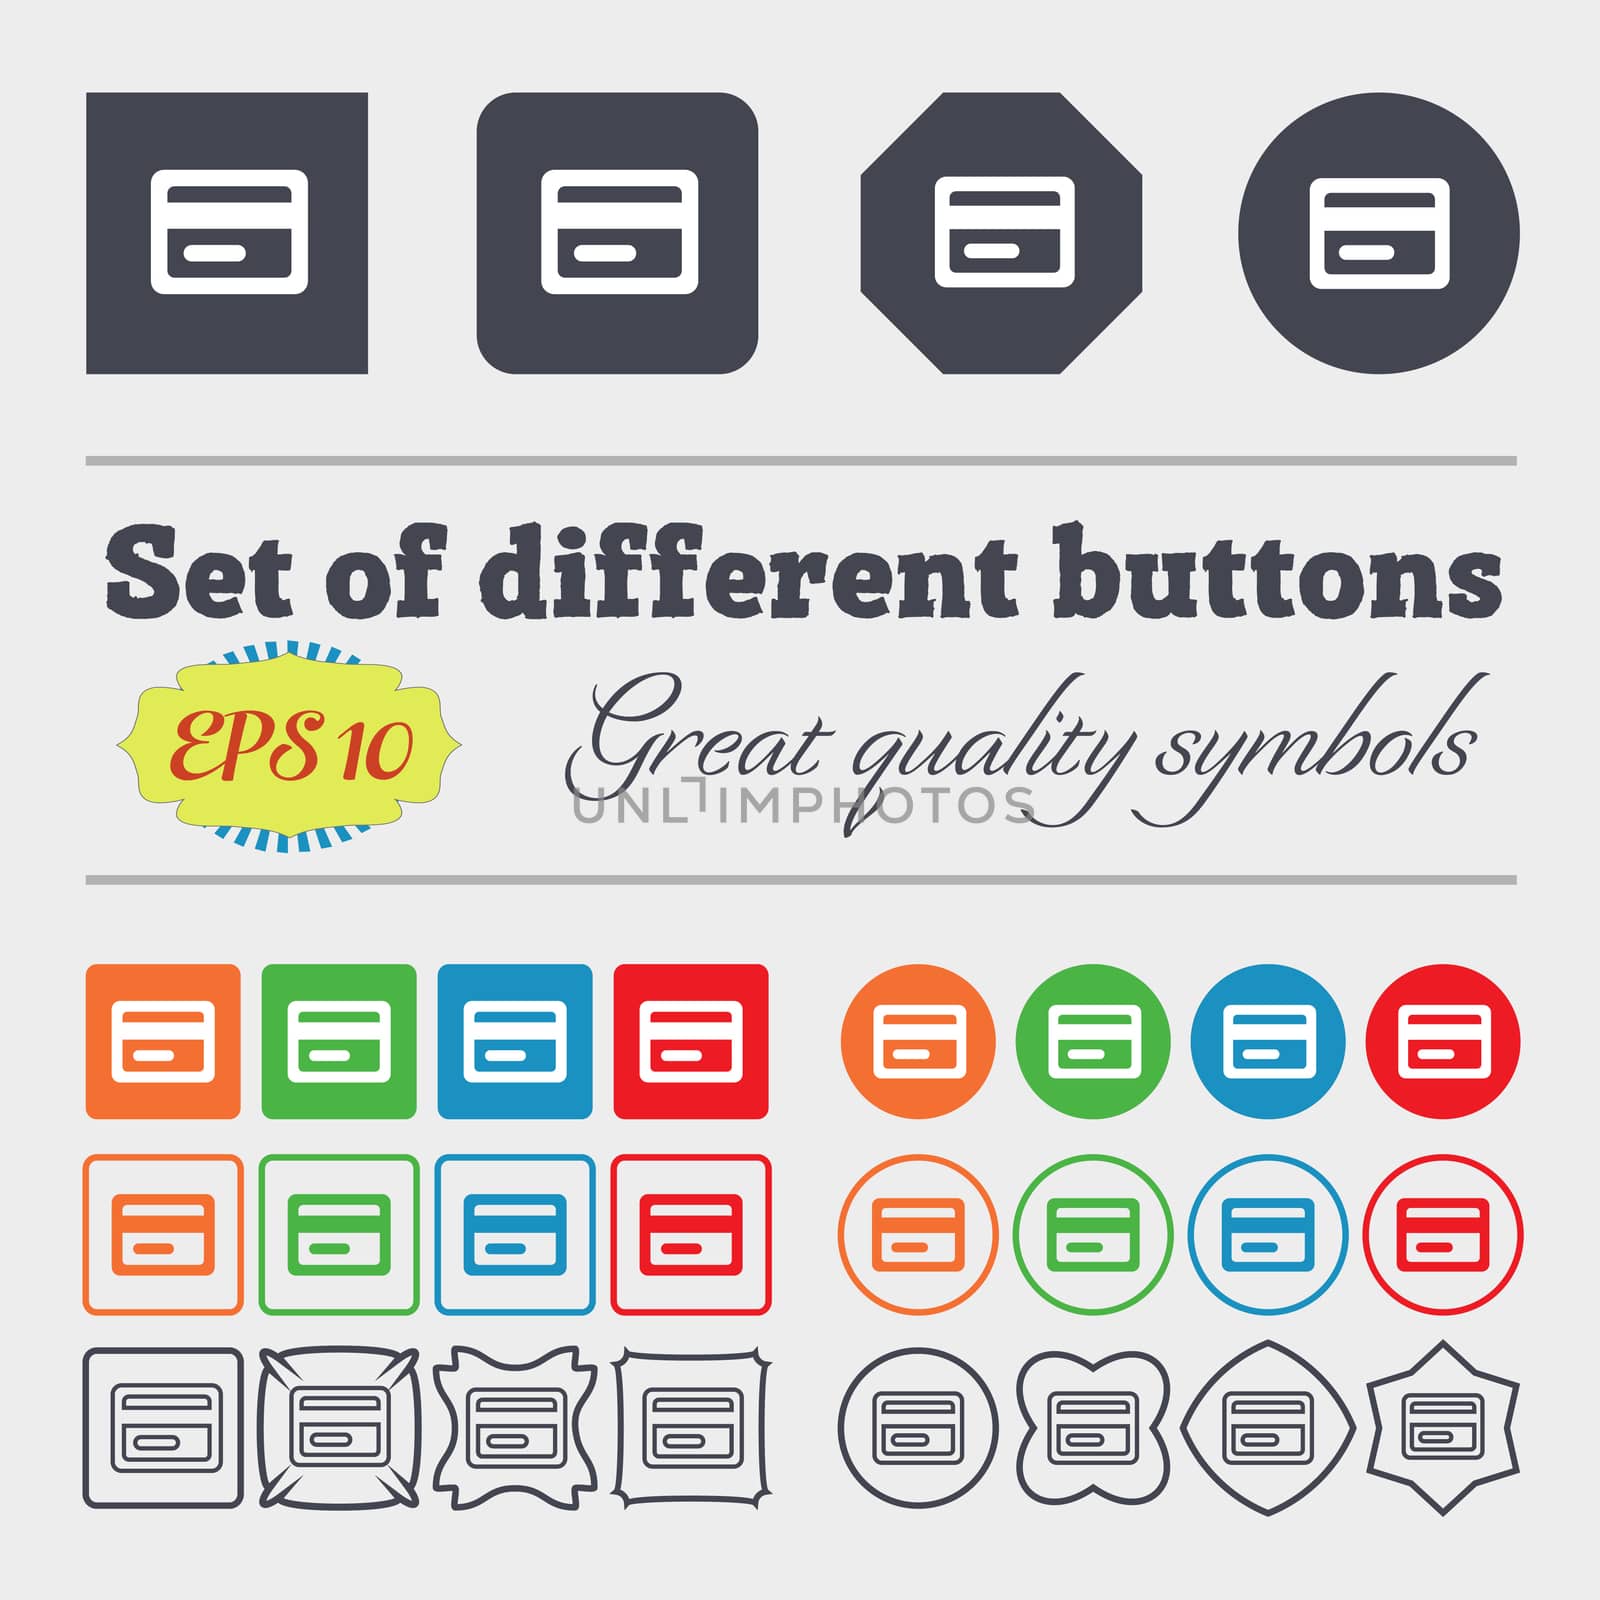 credit card icon sign. Big set of colorful, diverse, high-quality buttons. illustration